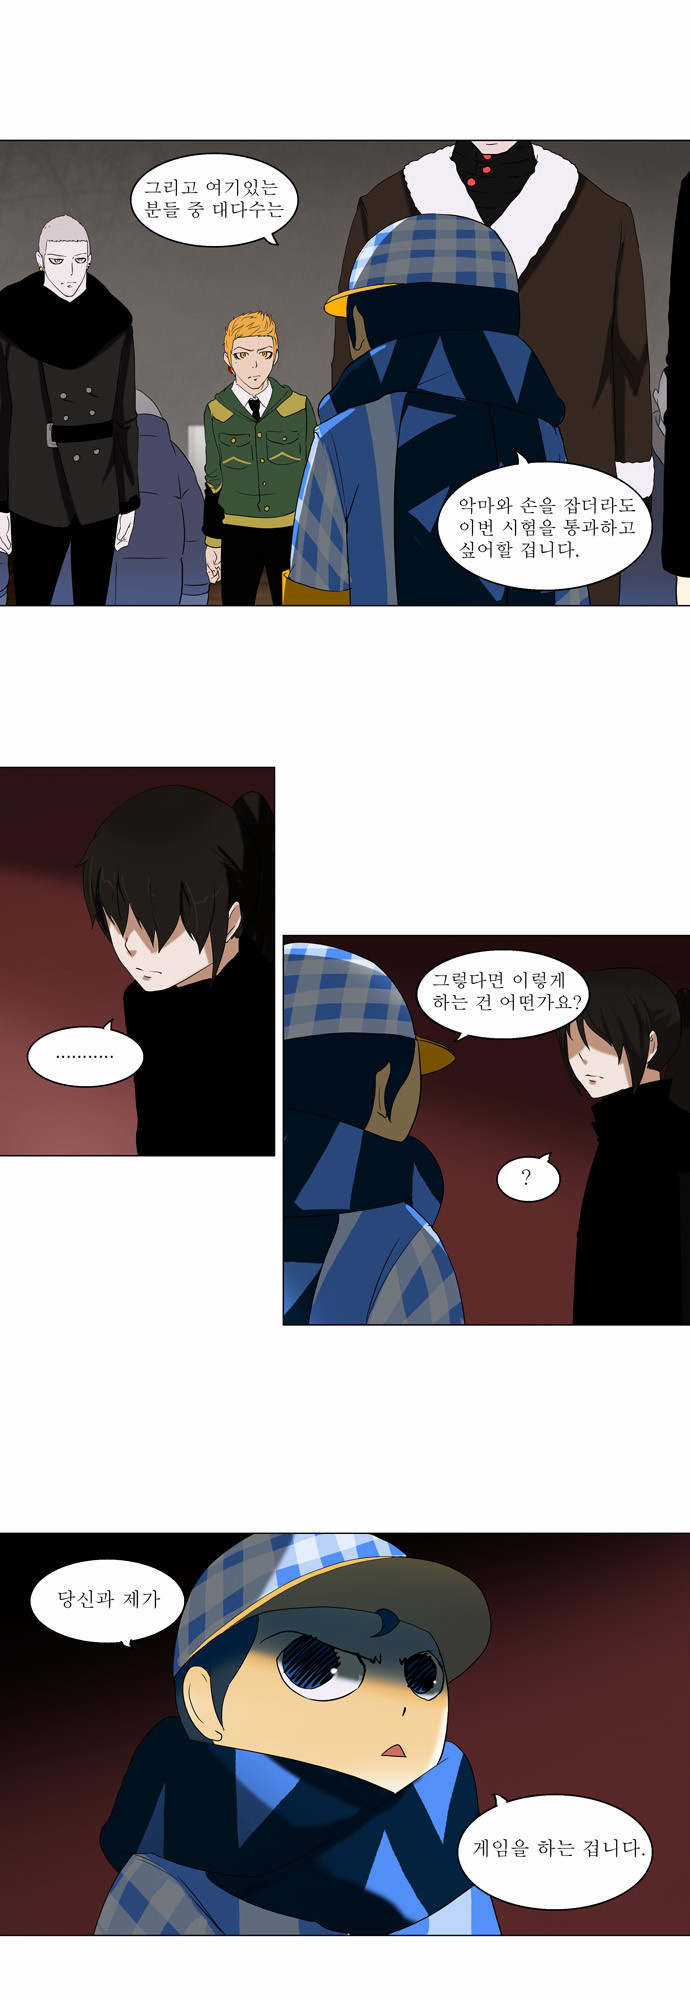 Tower of God - Chapter 90 - Page 1